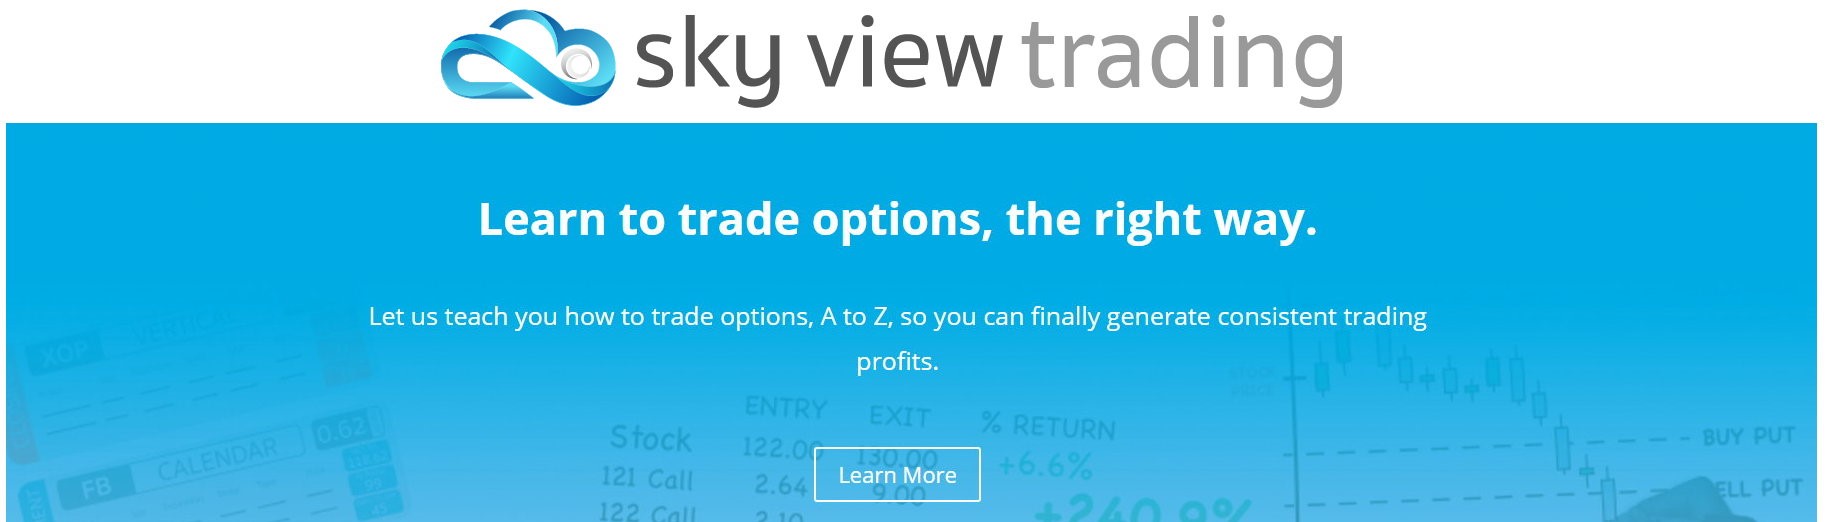 skyview trading banner1 Trade Options With Me